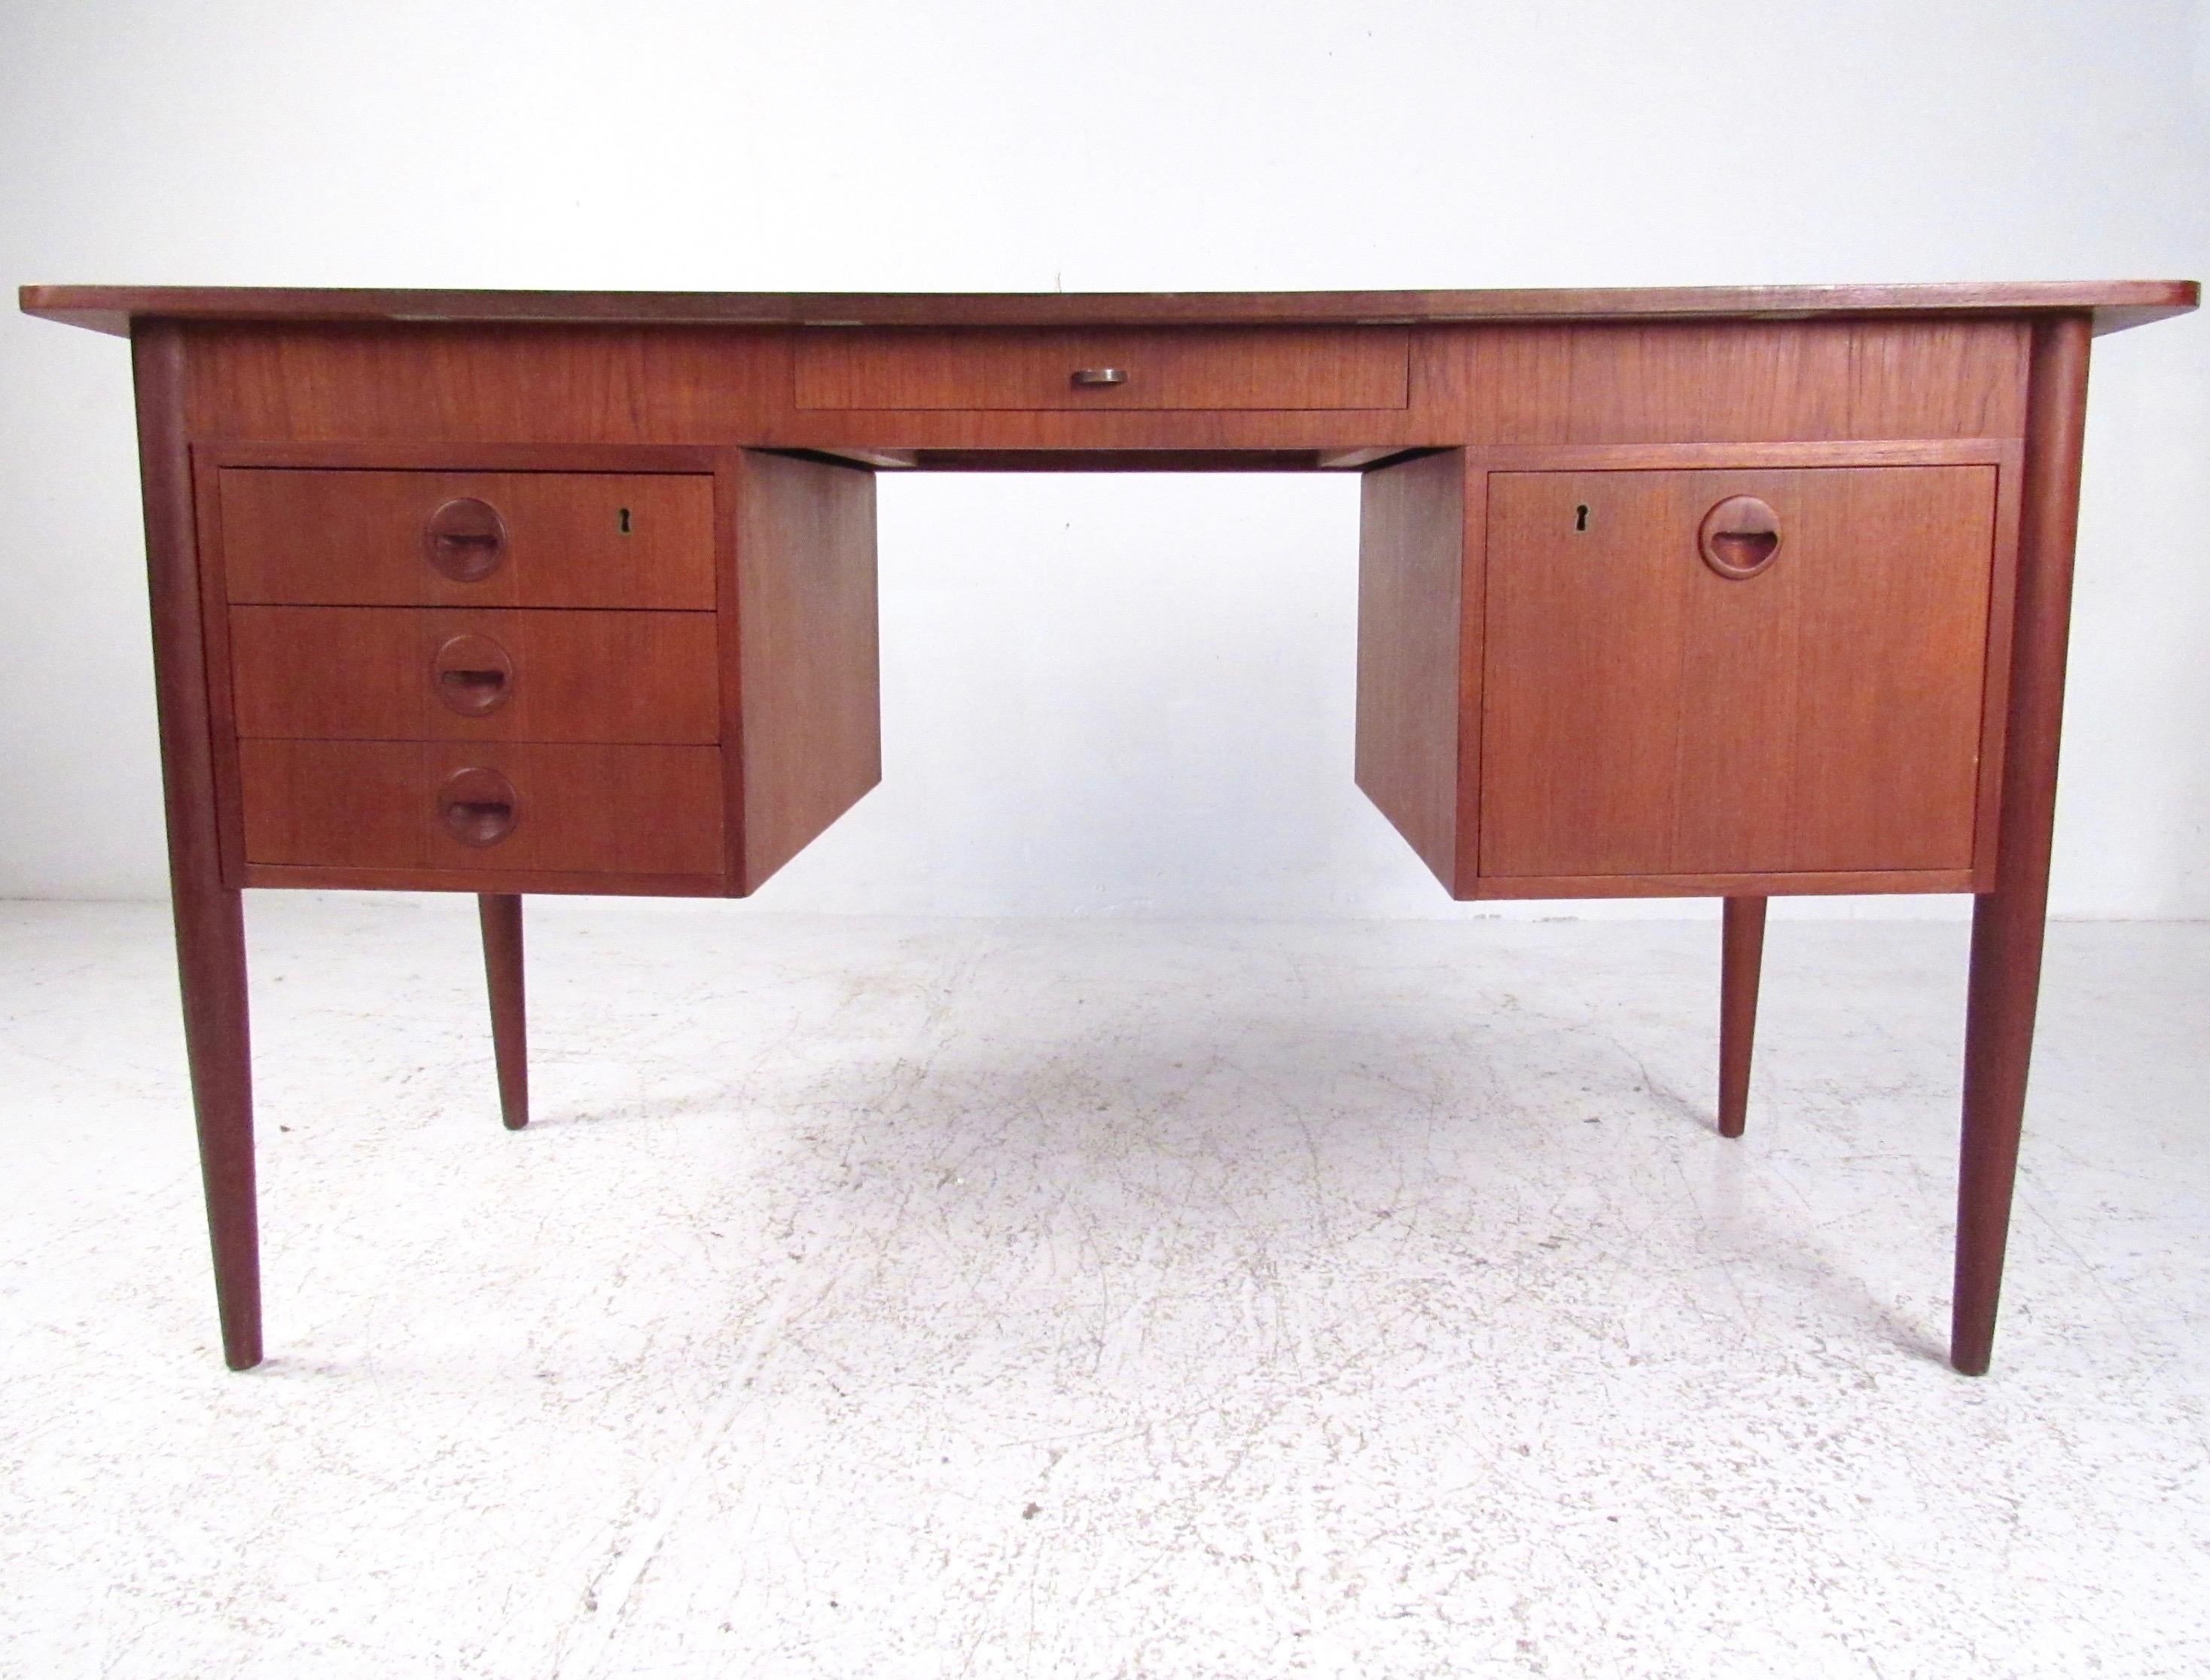 This striking Scandinavian Modern writing desk features Danish teak finish, sculptured drawer pulls, and quality vintage construction. This beautiful midcentury desk features double-sided finish and makes for an impressive addition to home or